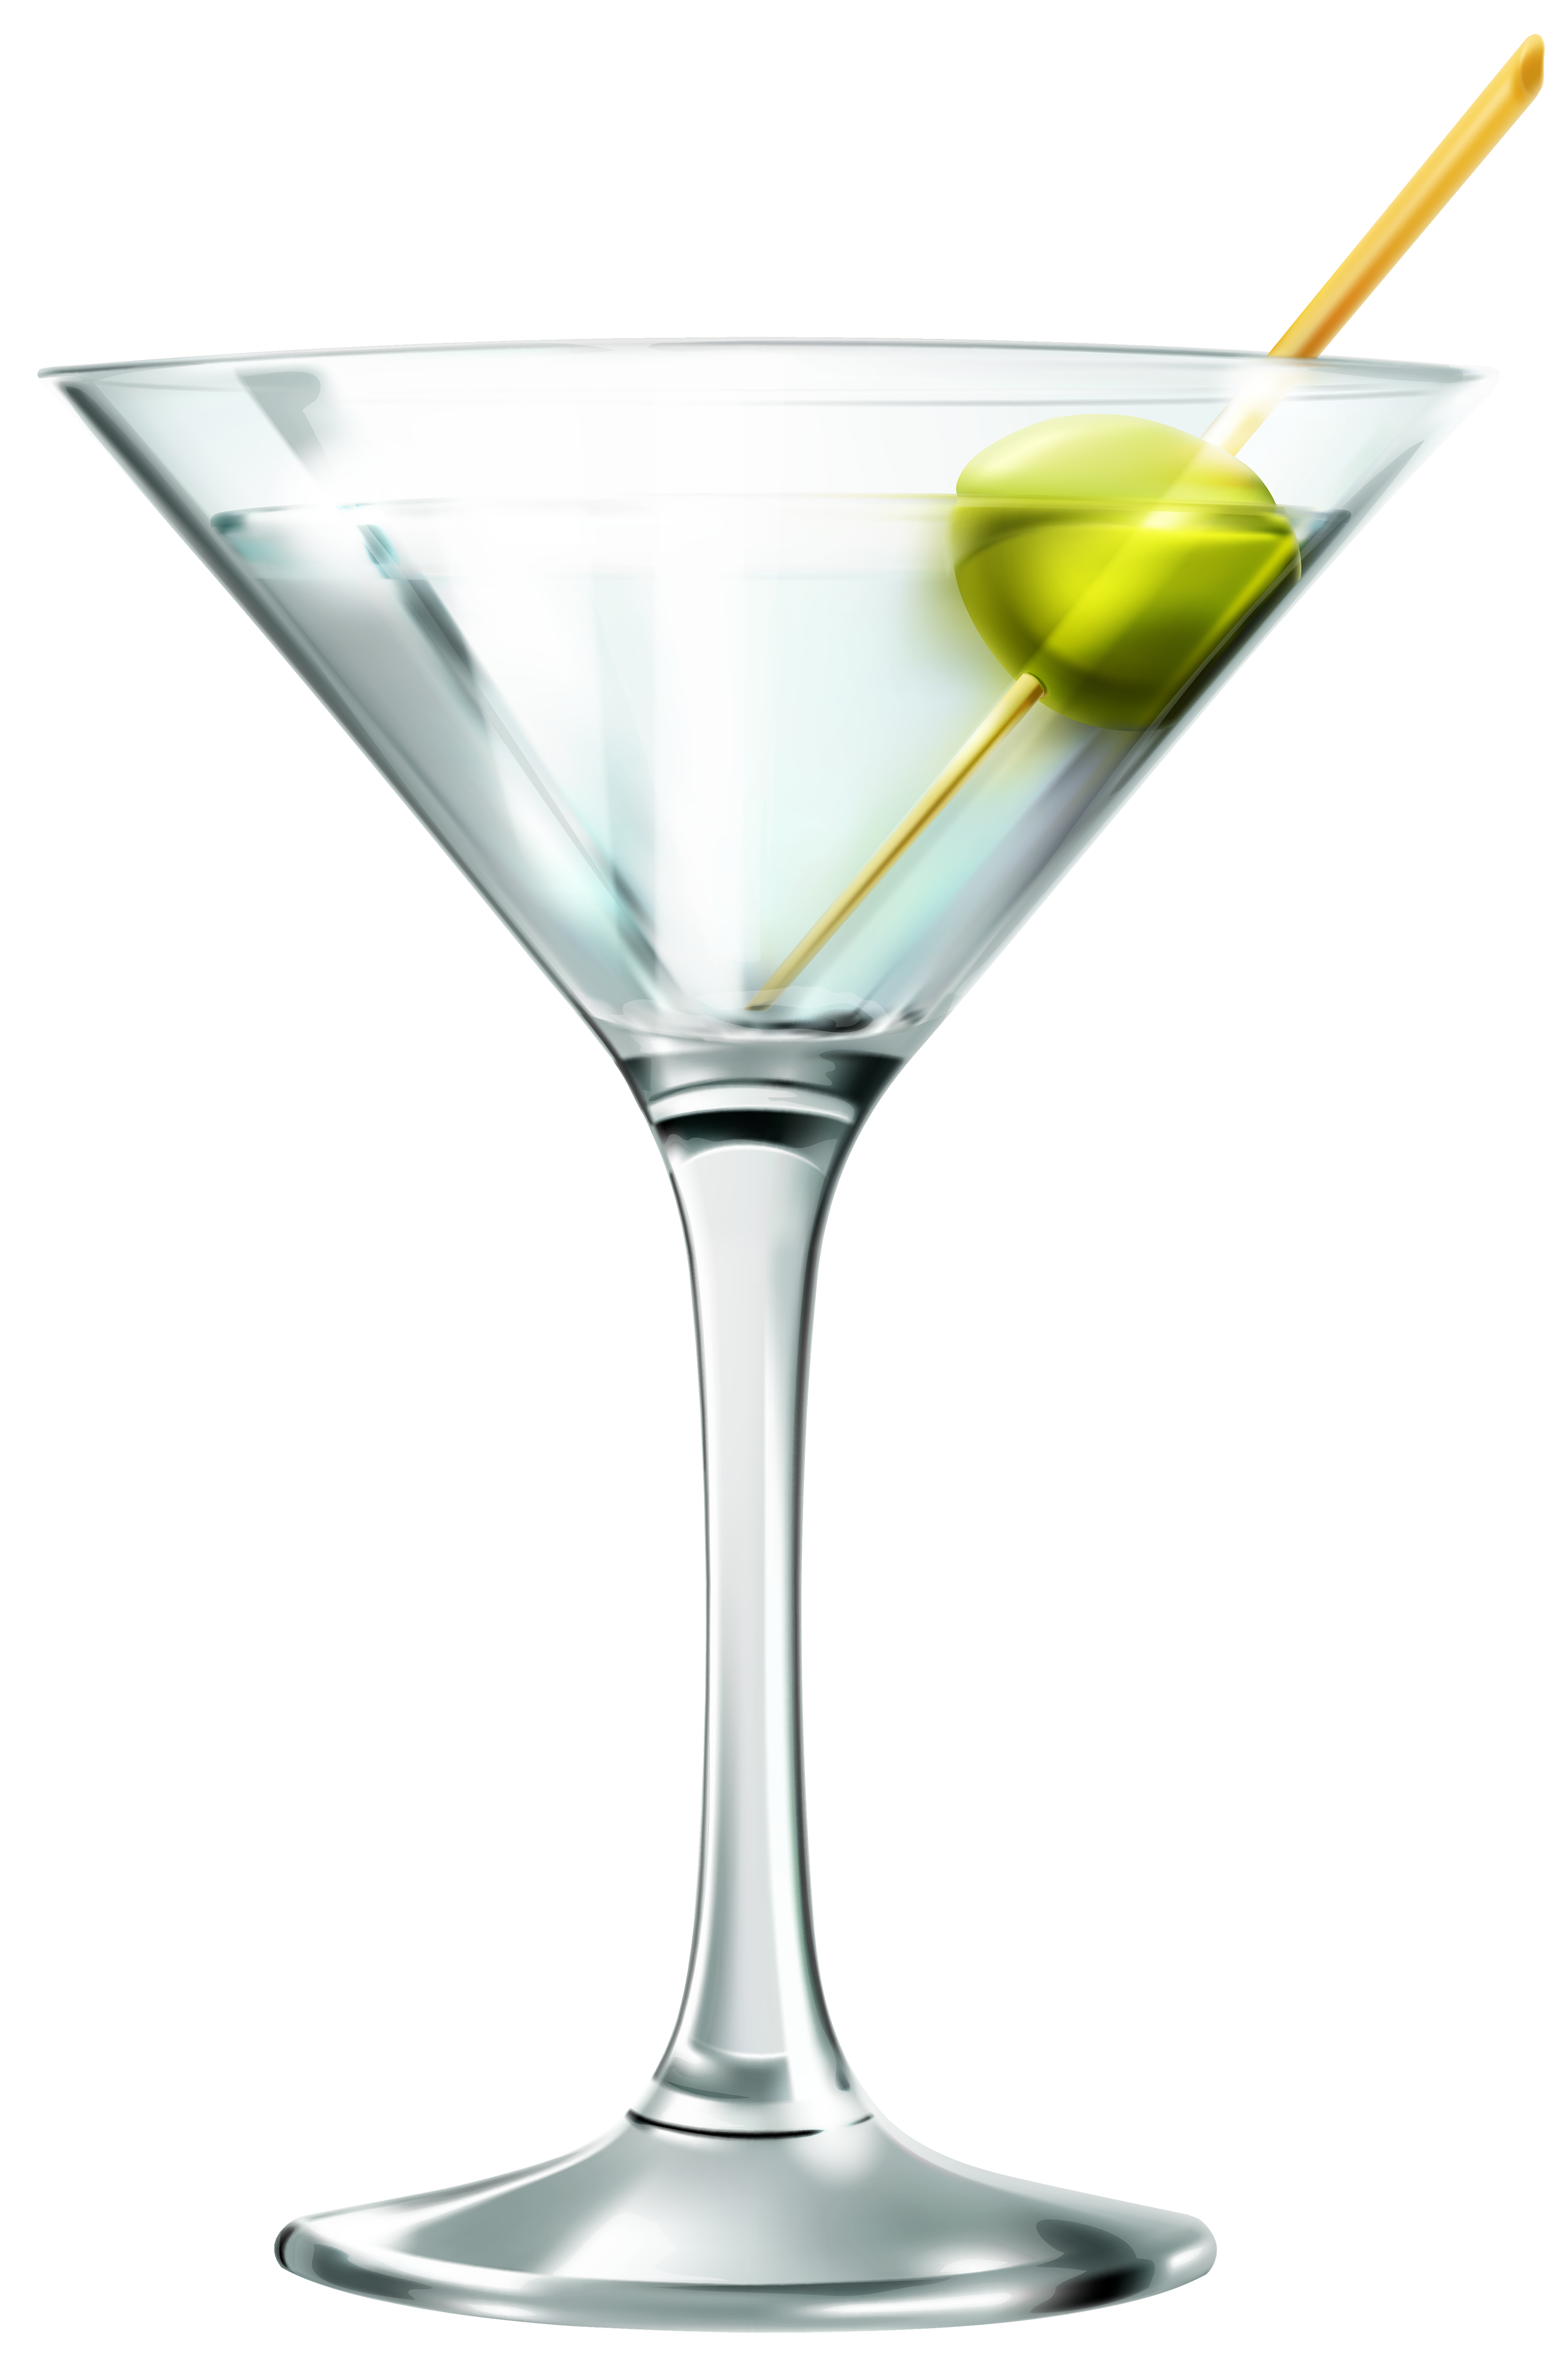 free clipart images martini glass - photo #36